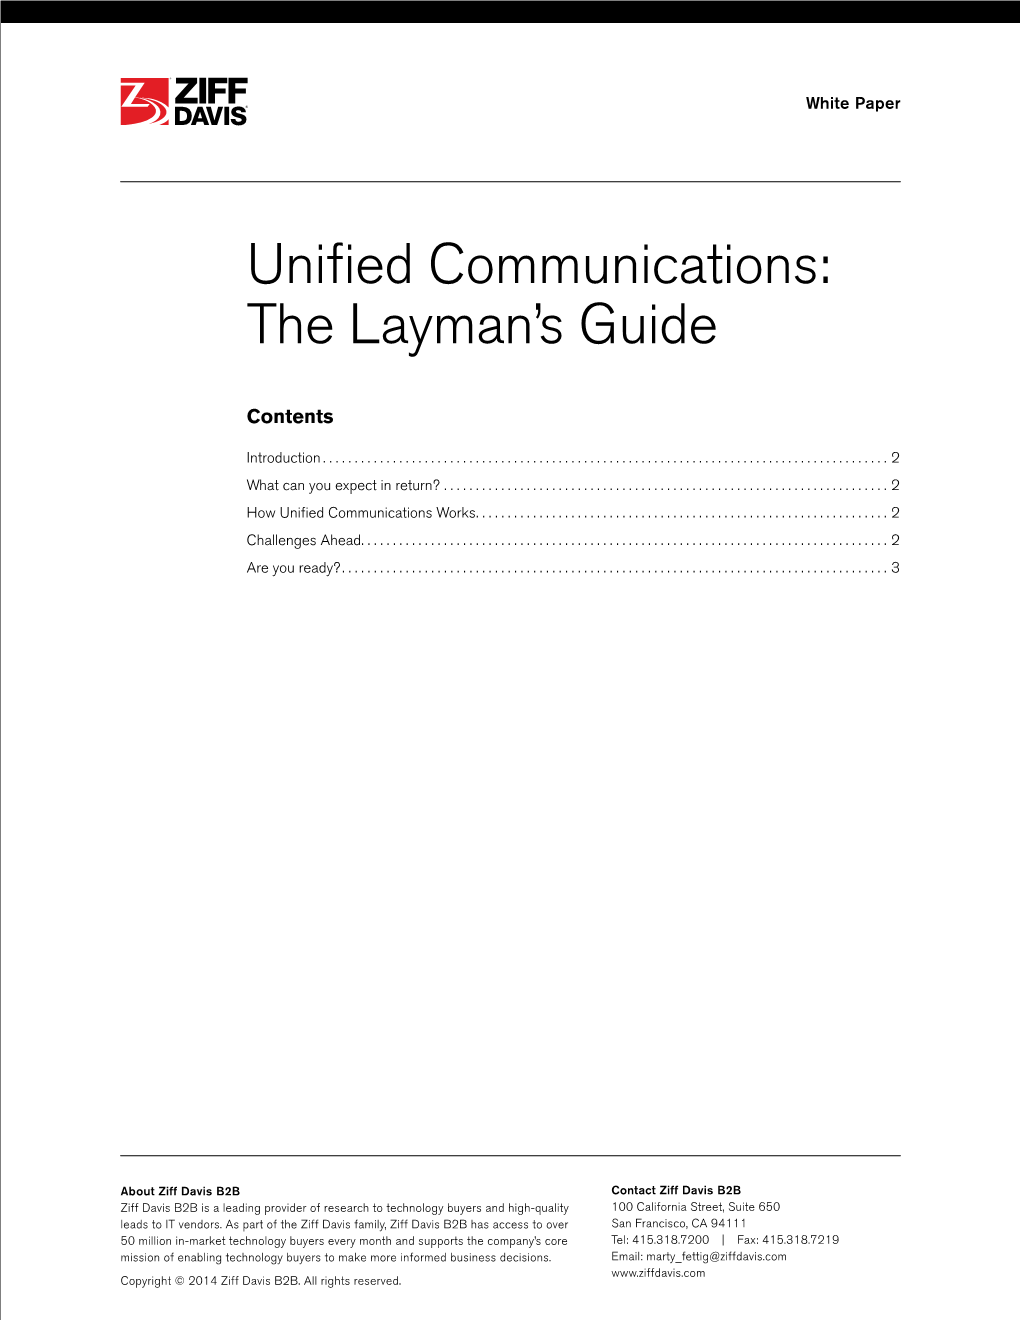 Unified Communications: the Layman's Guide